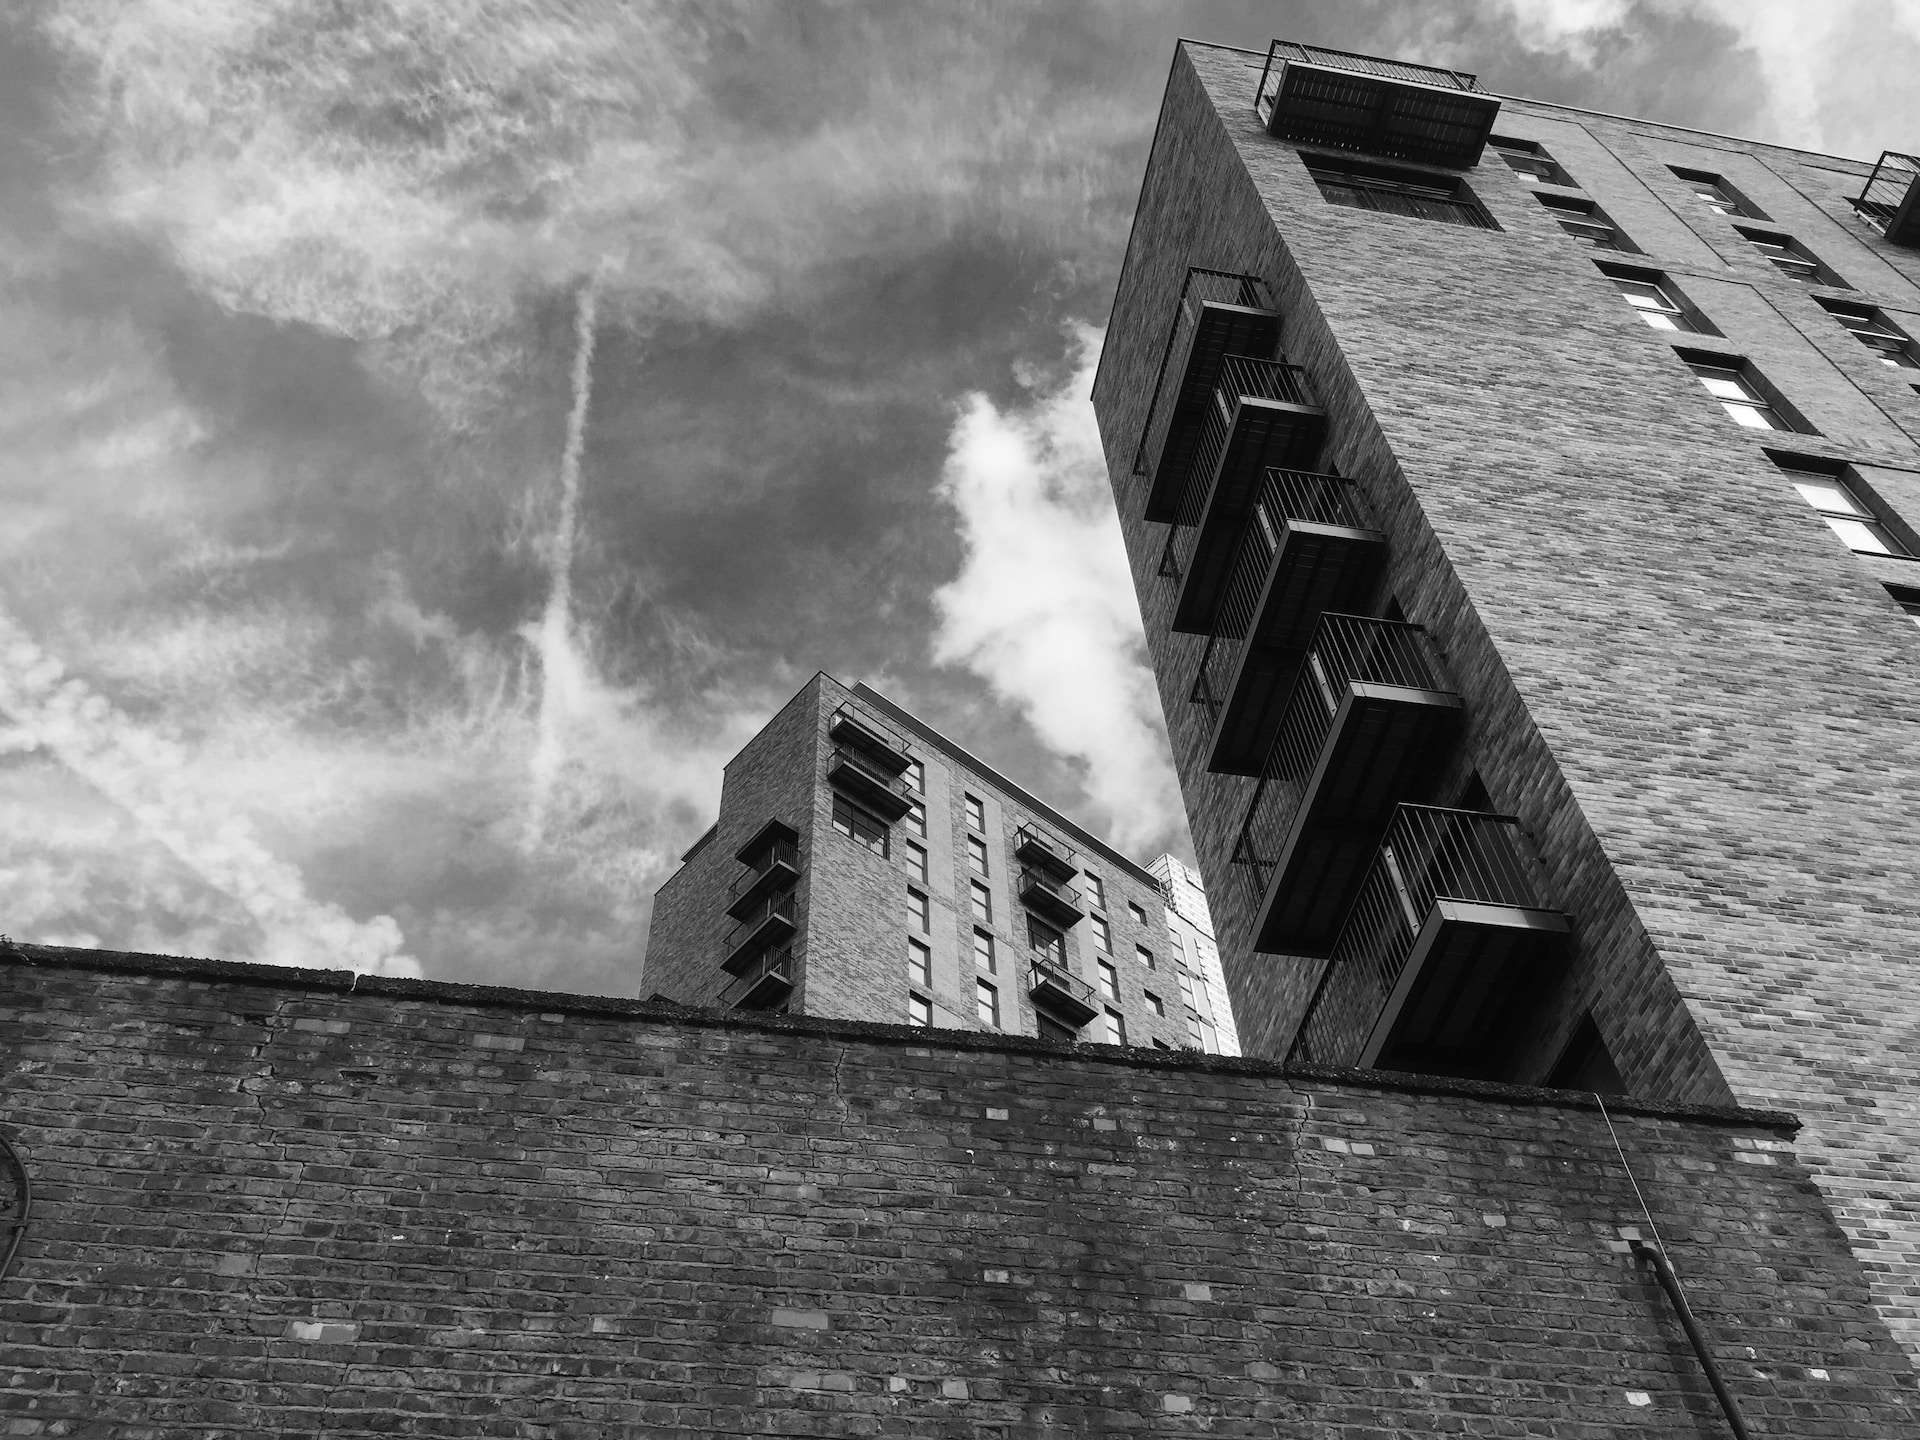 A block of flats in black and white